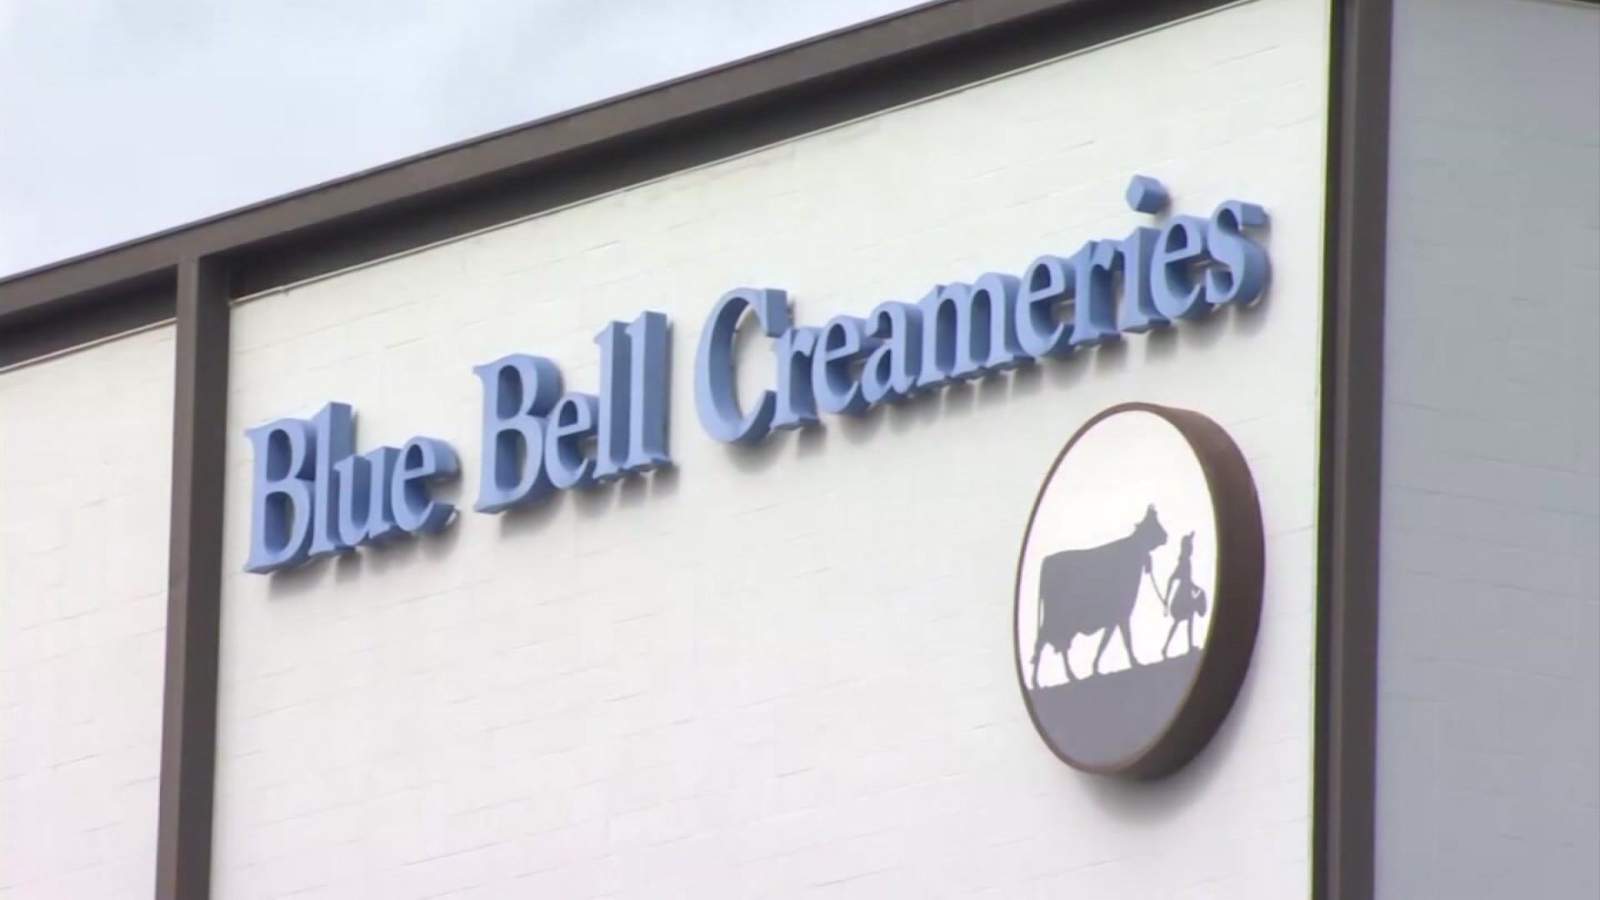 Blue Bell ordered to pay $17.25M in penalties linked to deadly listeria outbreak